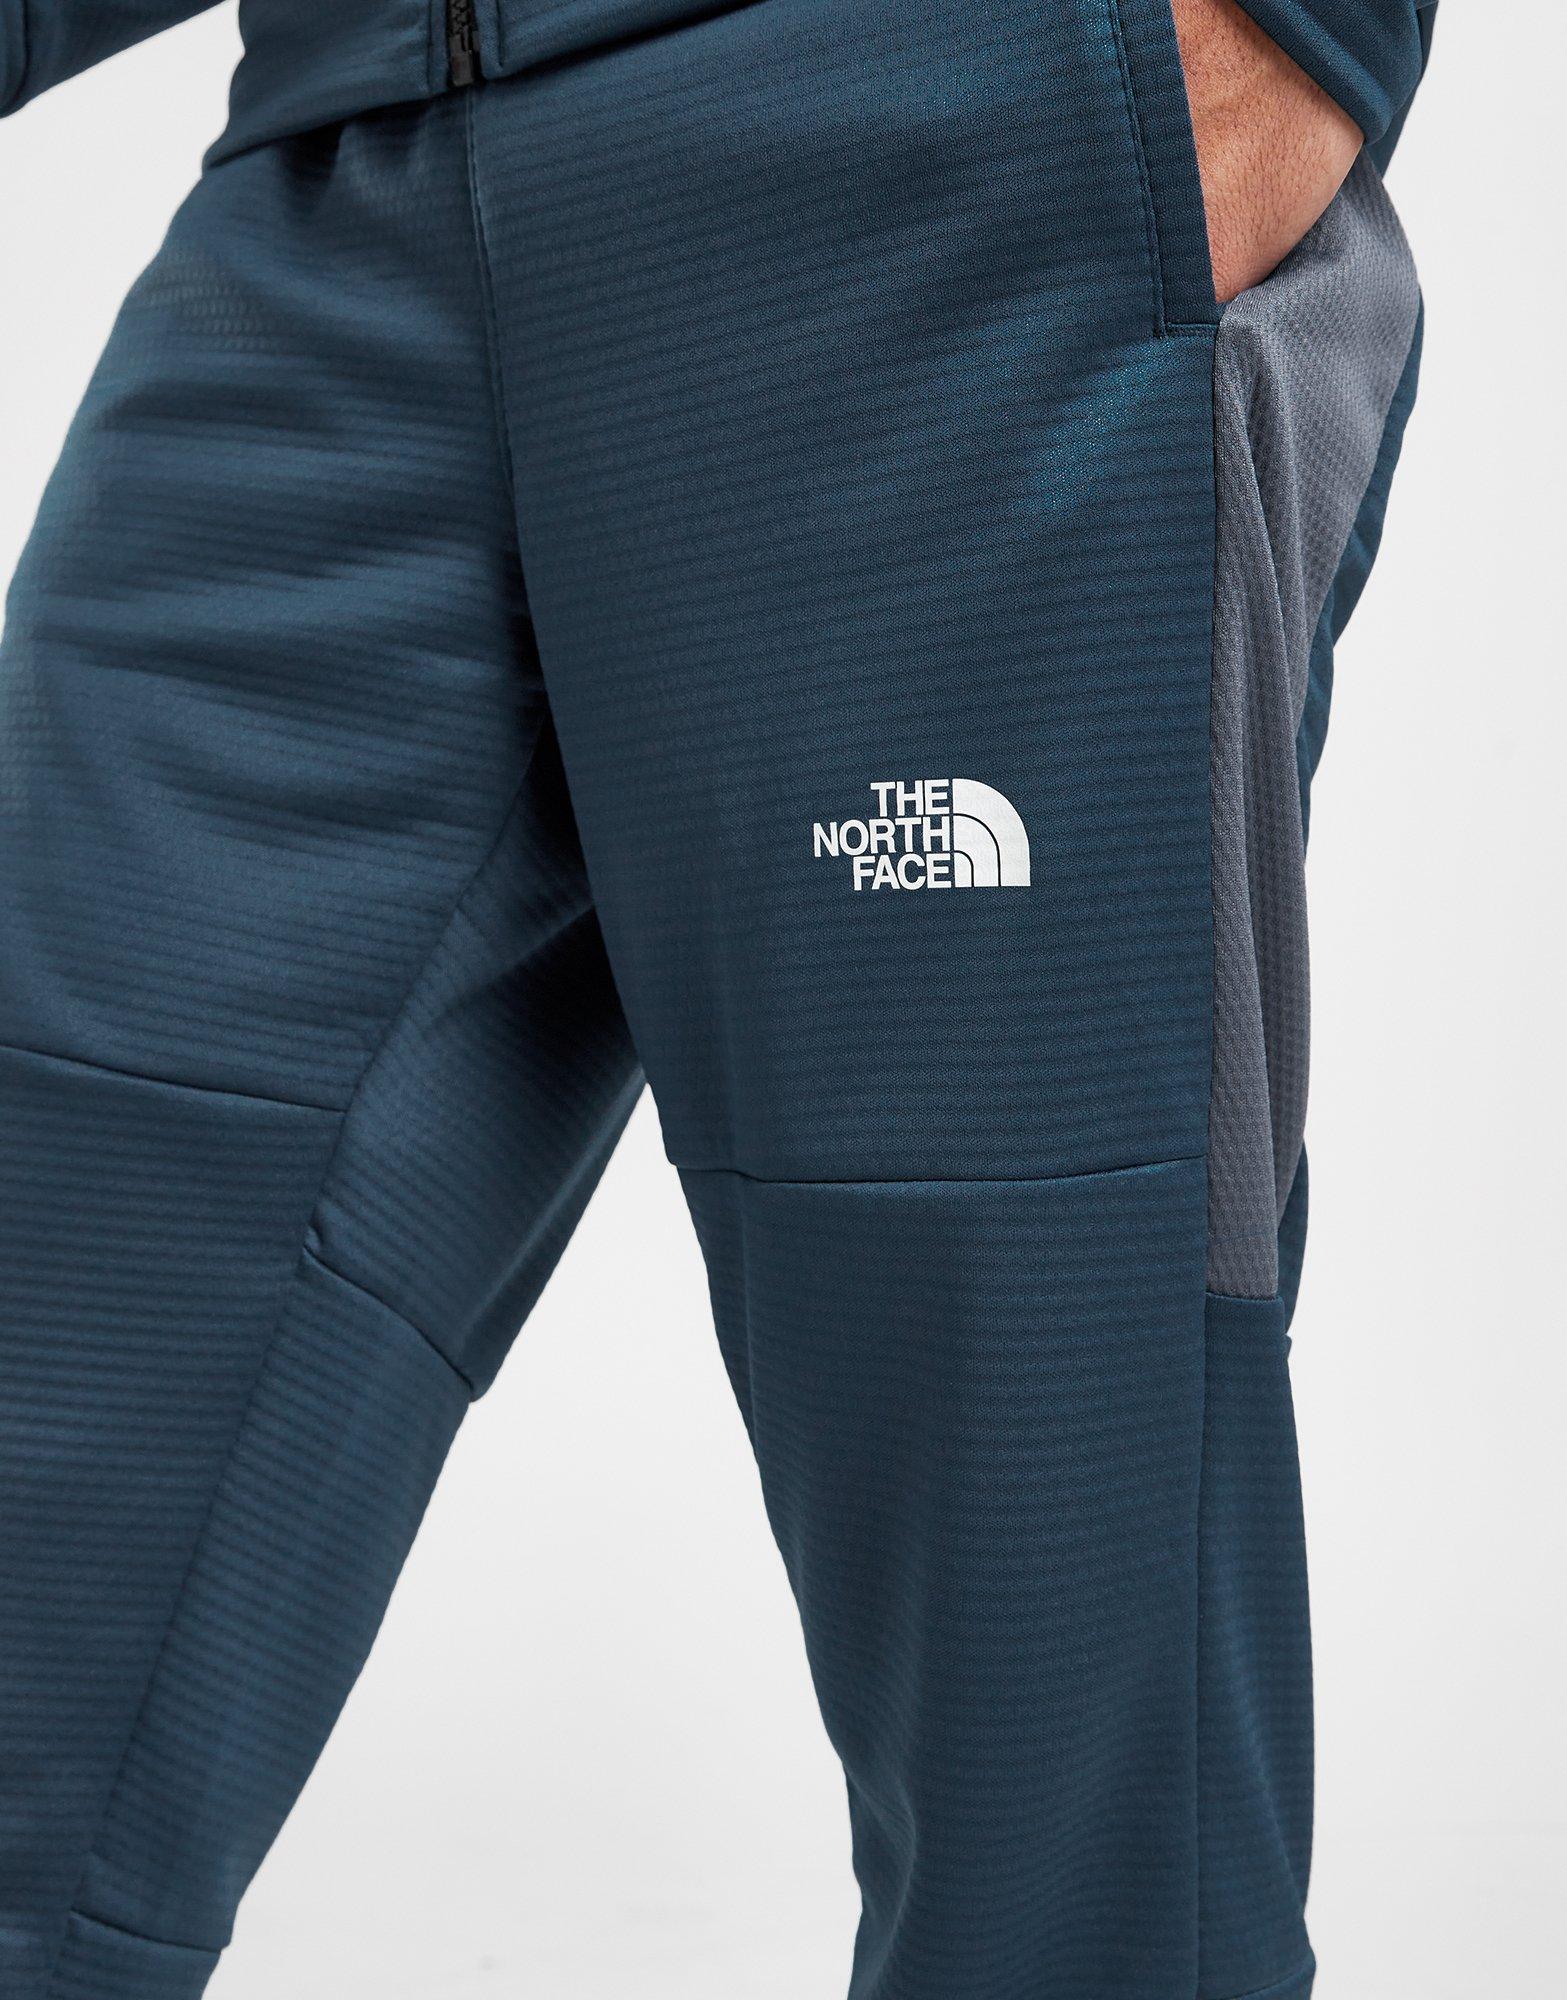 Blue The North Face Mountain Athletics Fleece Track Pants - JD Sports